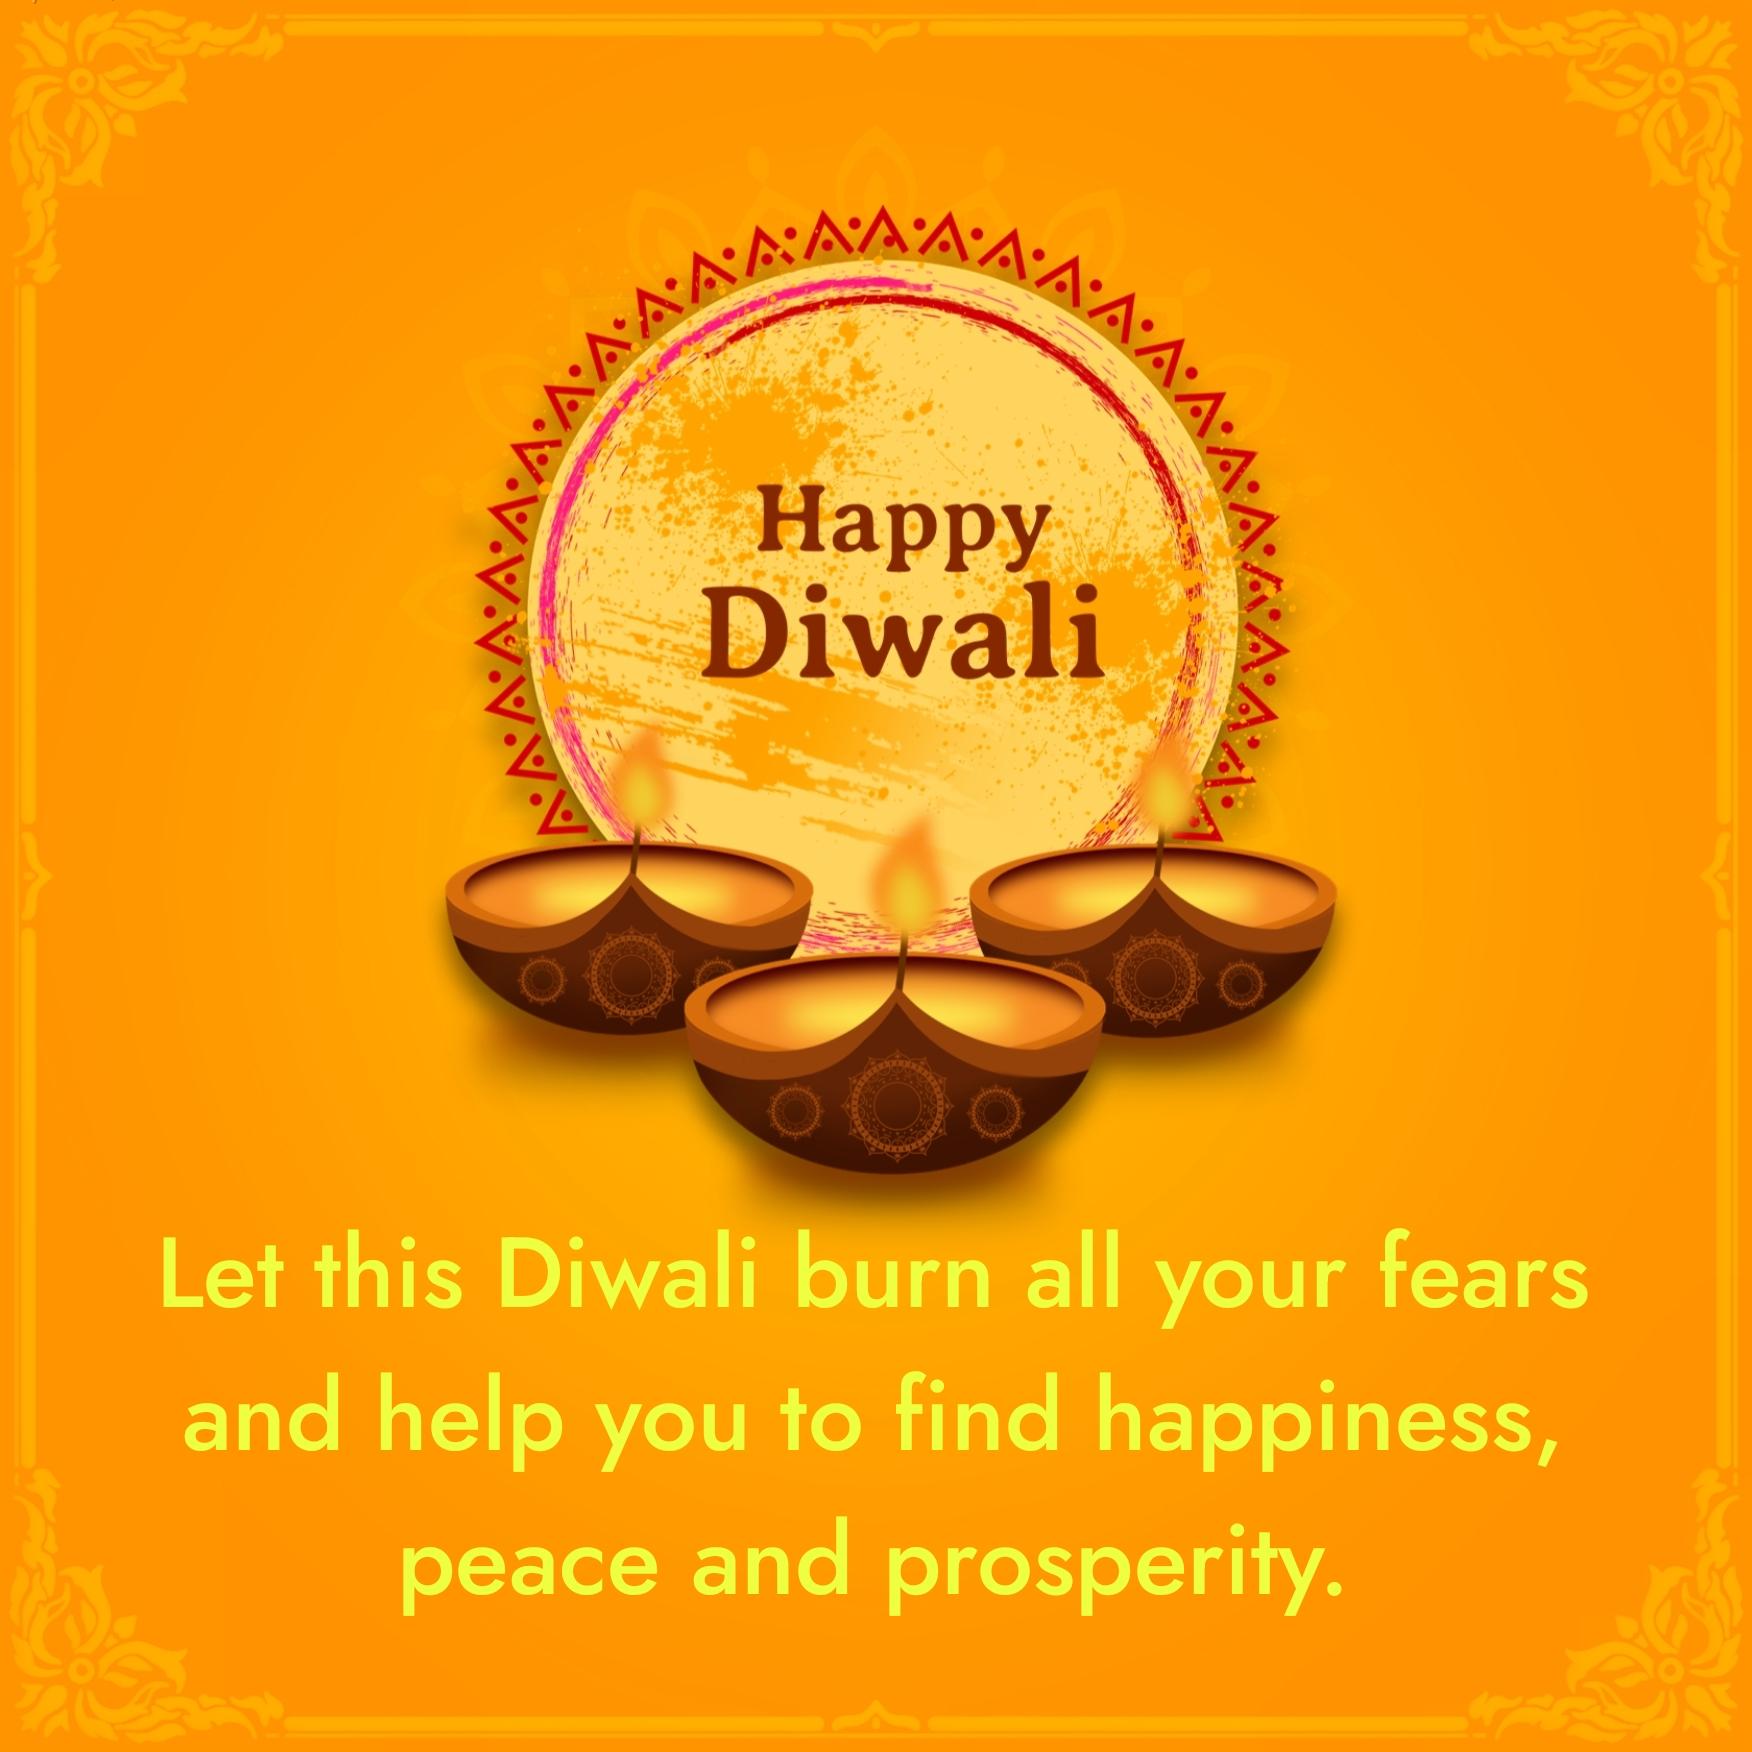 Let this Diwali burn all your fears and help you to find